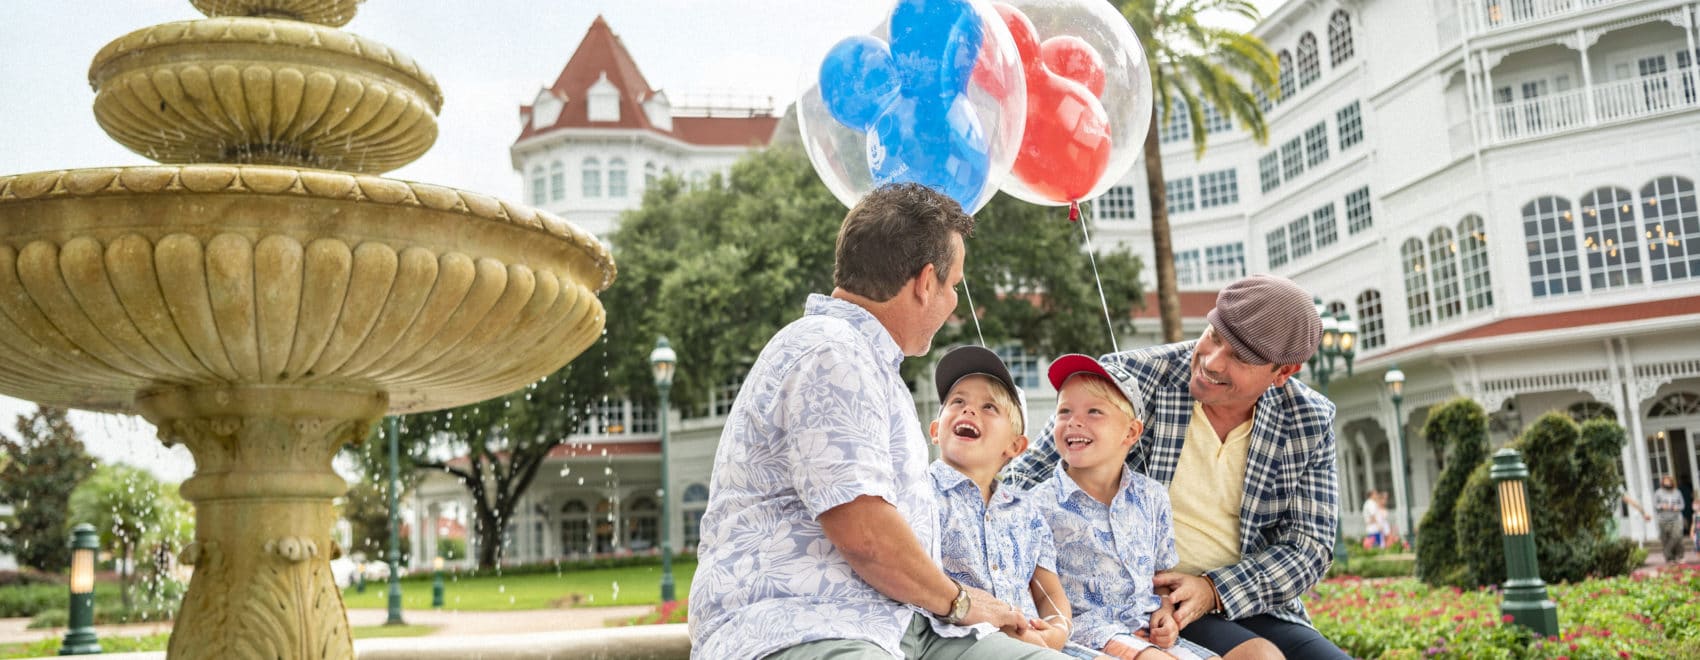 Kids and parents enjoy water features, Mickey balloons, and even more time together staying at the beautiful hotels near Walt Disney World's Magic Kingdom in Florida - like the Grand Floridian